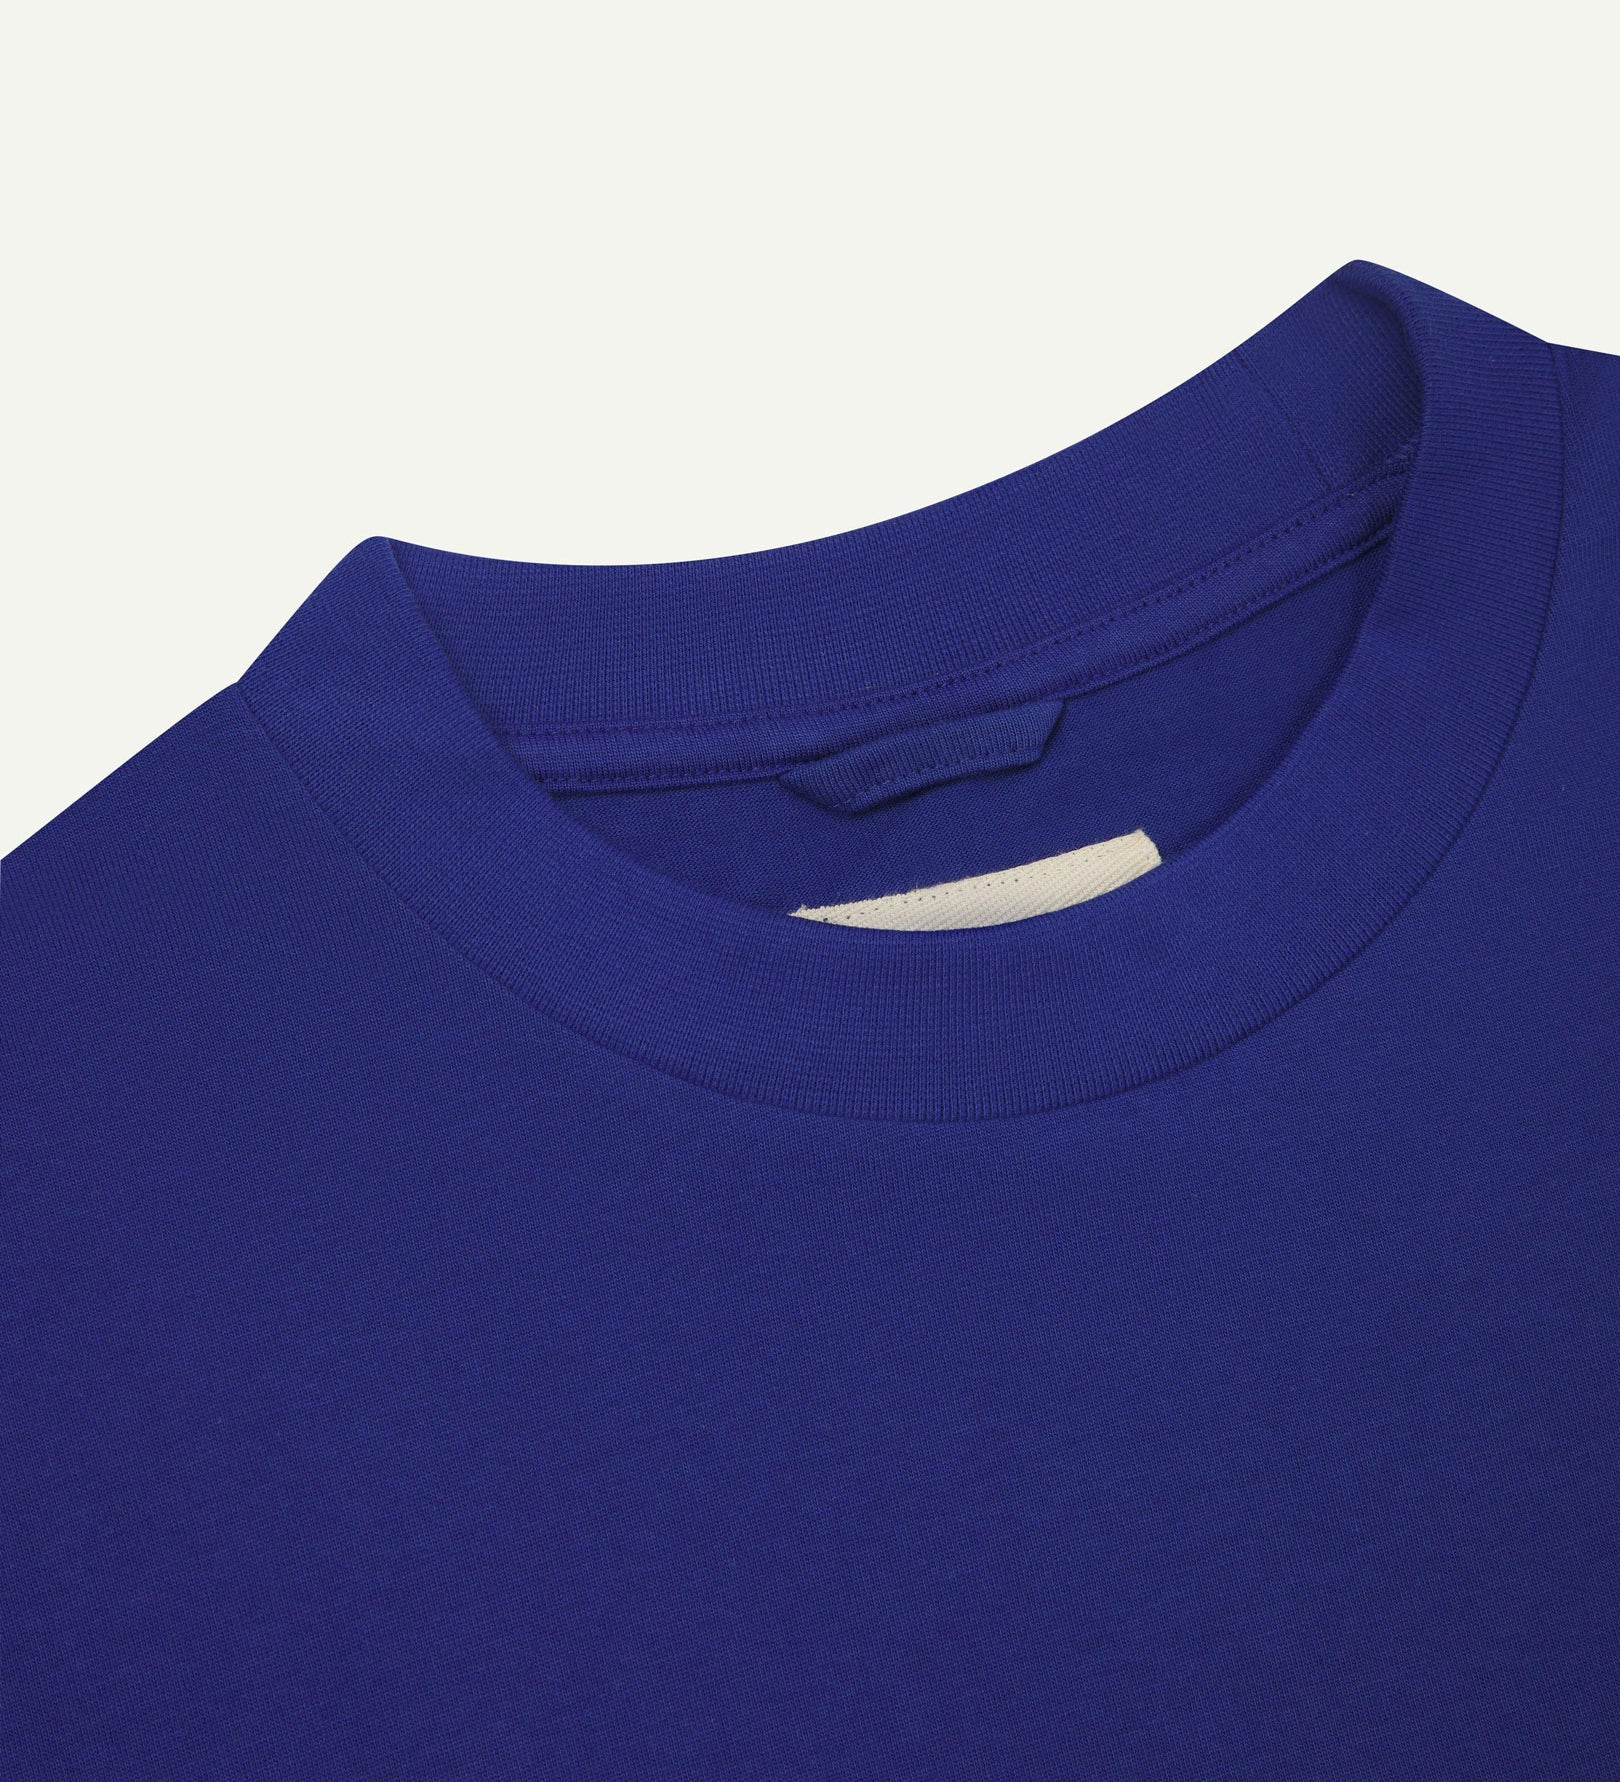 Neckline close-up of ultra blue organic cotton oversized T-shirt showing hanging loop and Uskees branding label.